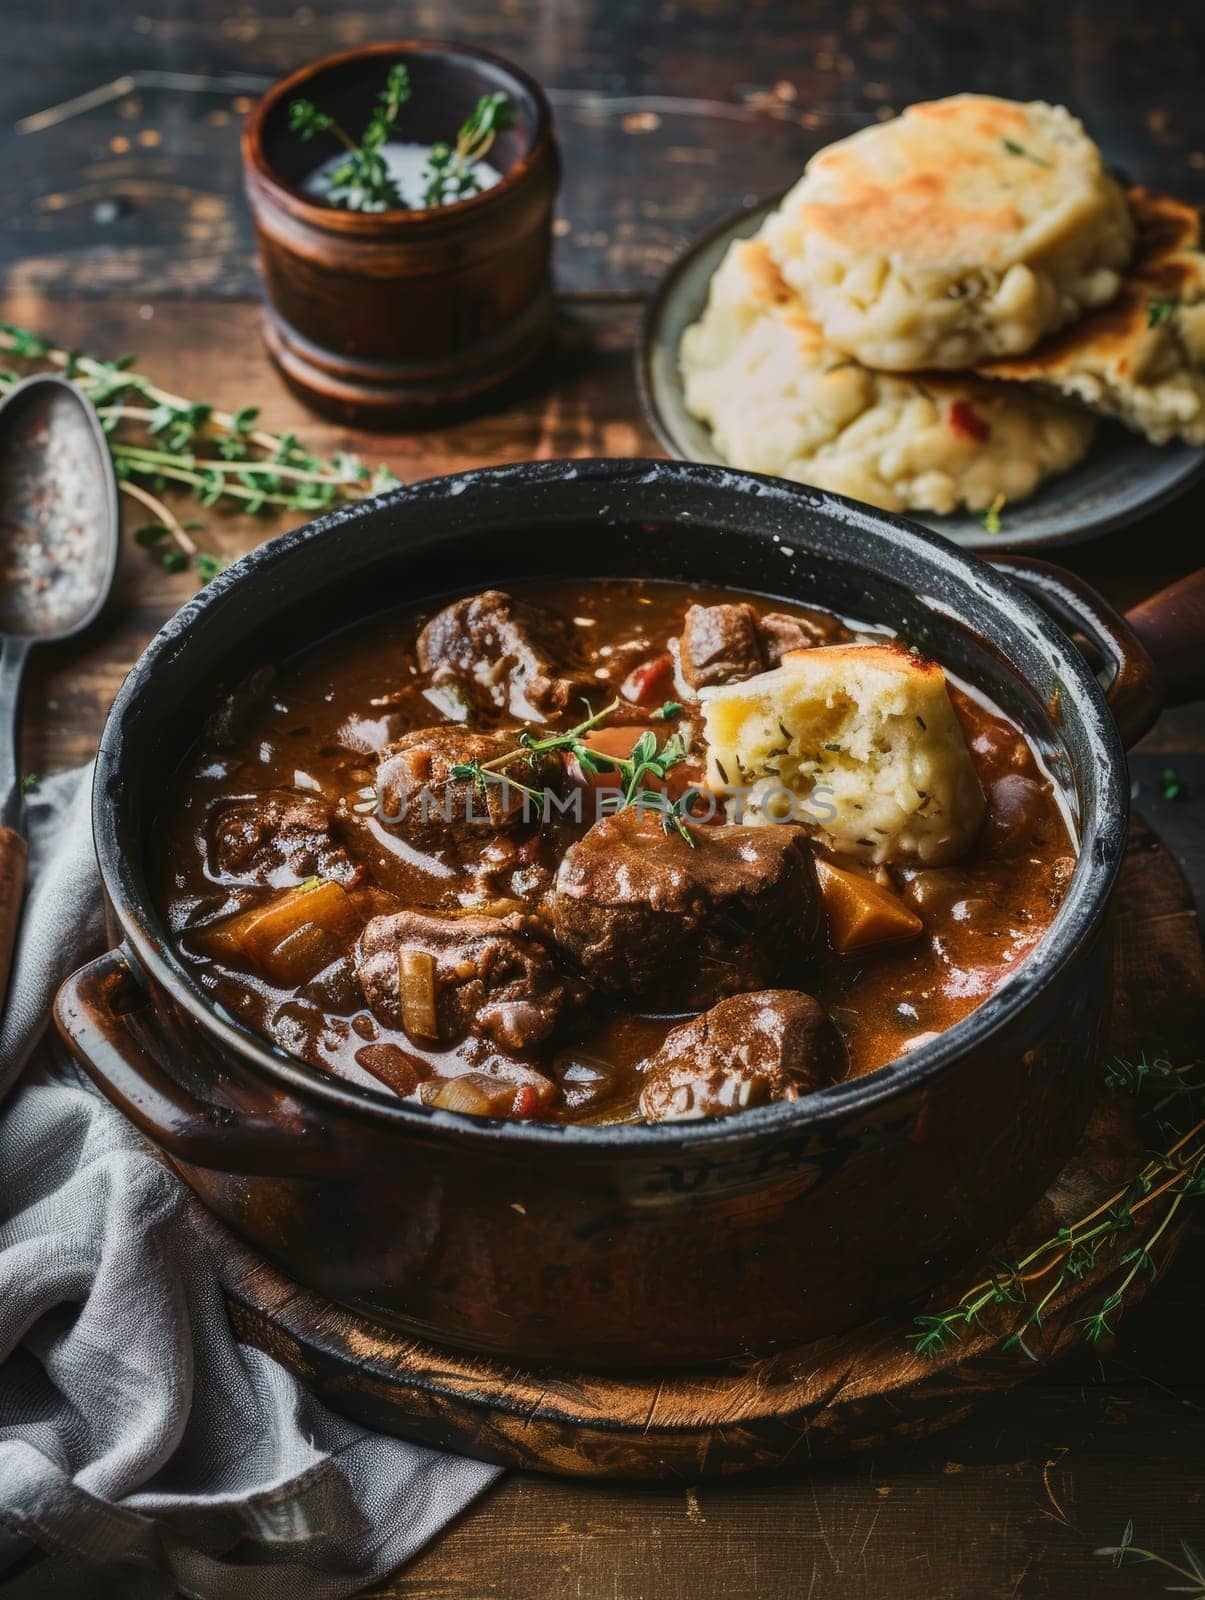 Hungarian goulash, a hearty beef stew simmered in a rich paprika-infused broth, served with fluffy dumplings in a rustic, authentic presentation. Dish represents the traditional of Hungarian cuisine